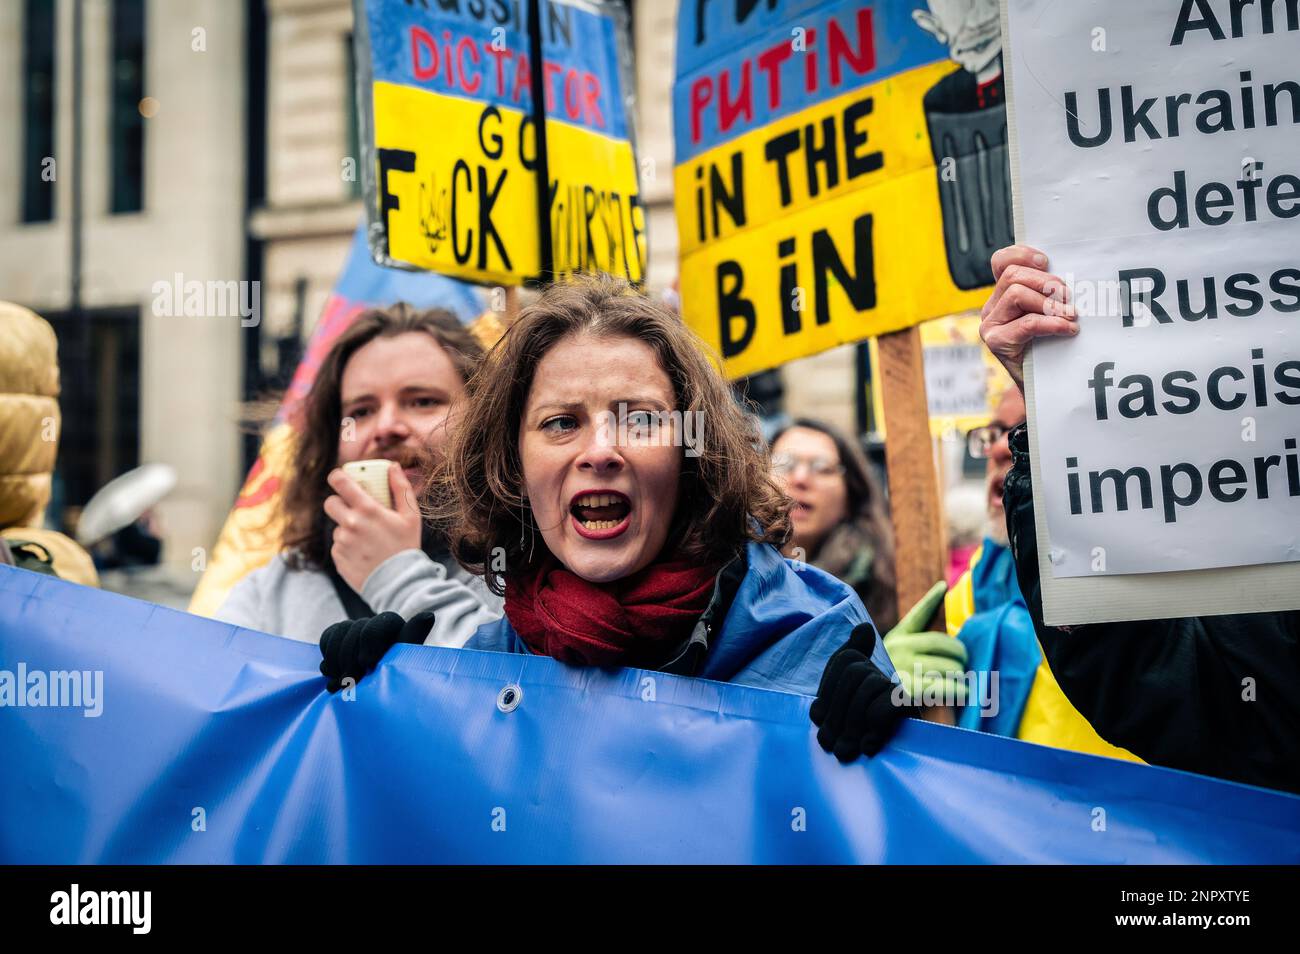 Woman supporting Ukraine at a protest Stock Photo